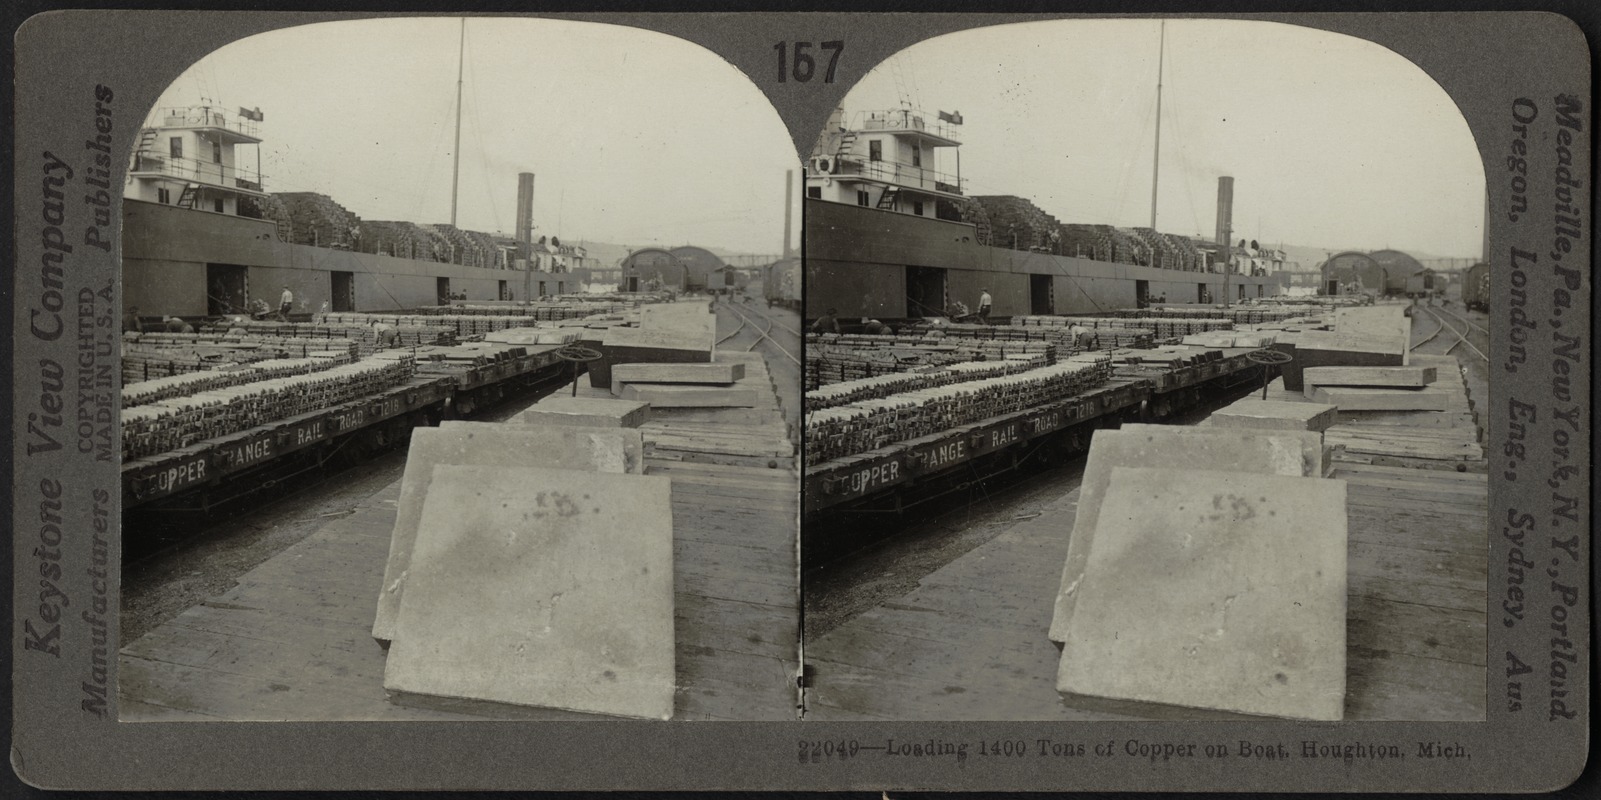 Loading copper on a boat, Houghton, Mich.